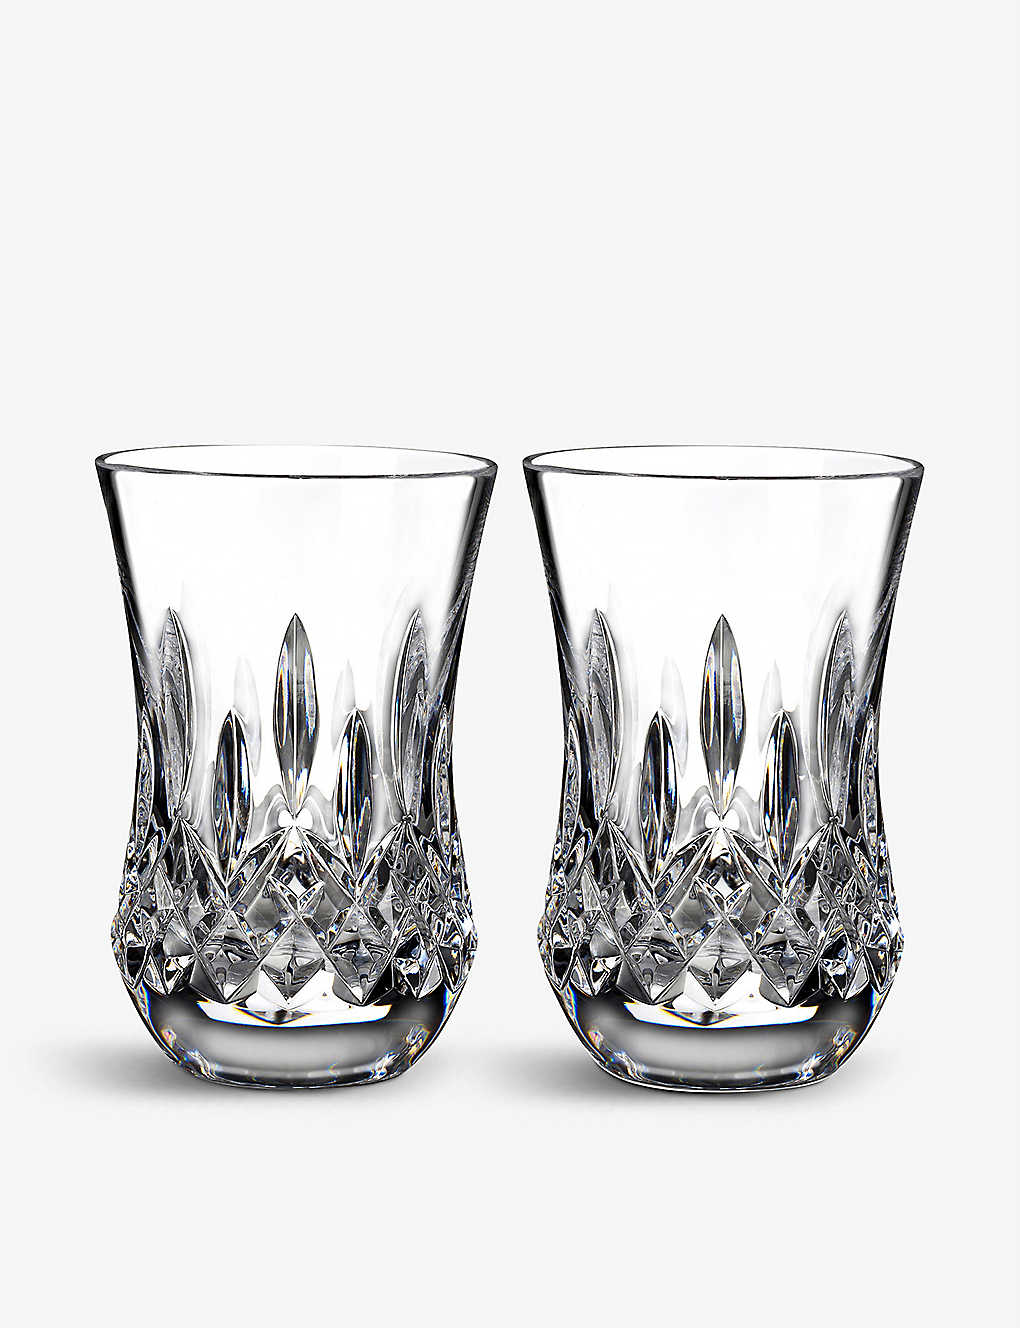 WATERFORD リズモア フレア クリスタル タンブラー 2個セット Lismore flared crystal tumblers set of two